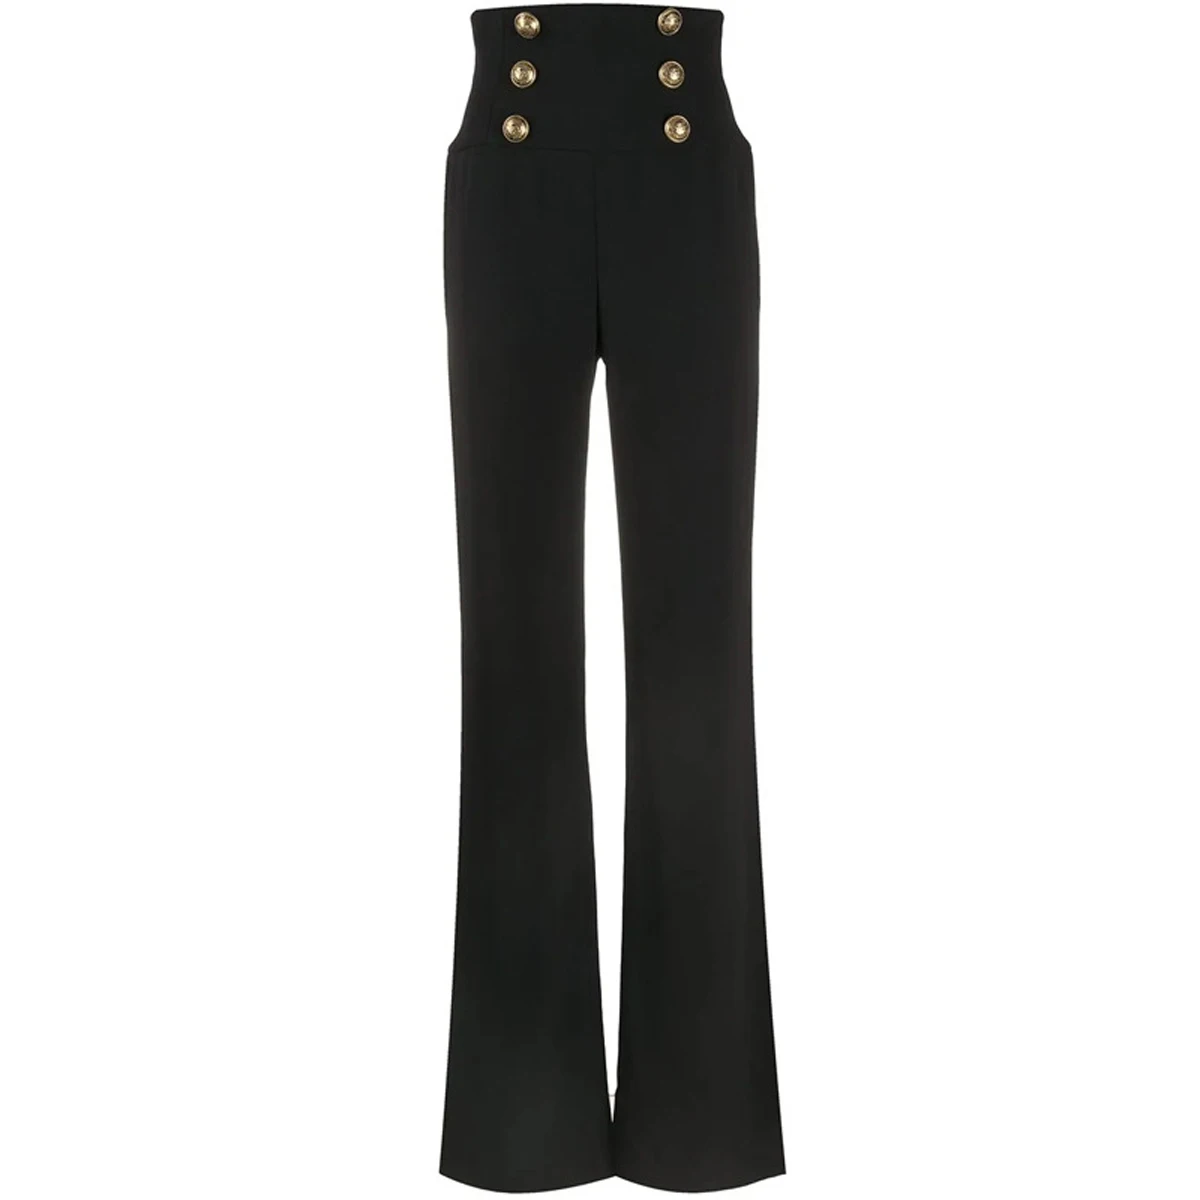 Women's Spring and Autumn Black Wide Leg Office Lady High Waist Flare Pants Sagging Long Casual Trousers